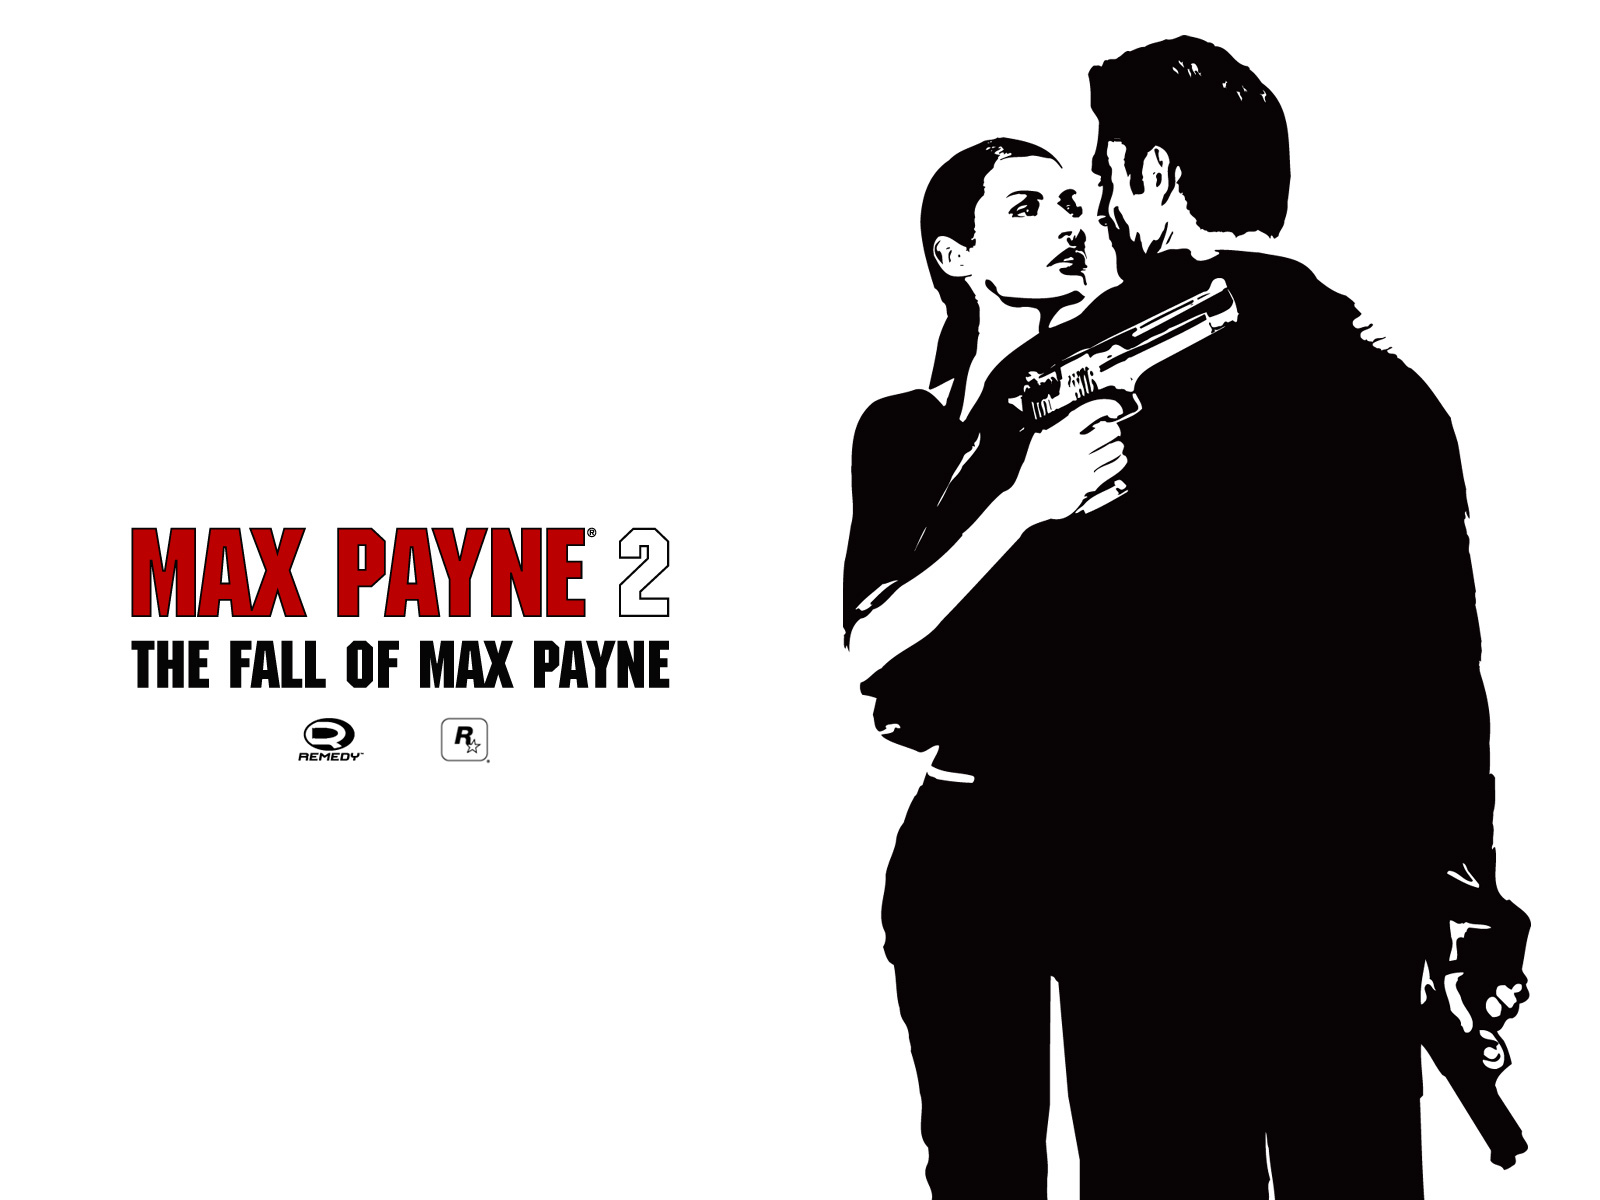 Max Payne 2: The Fall of Max Payne (2003) promotional art